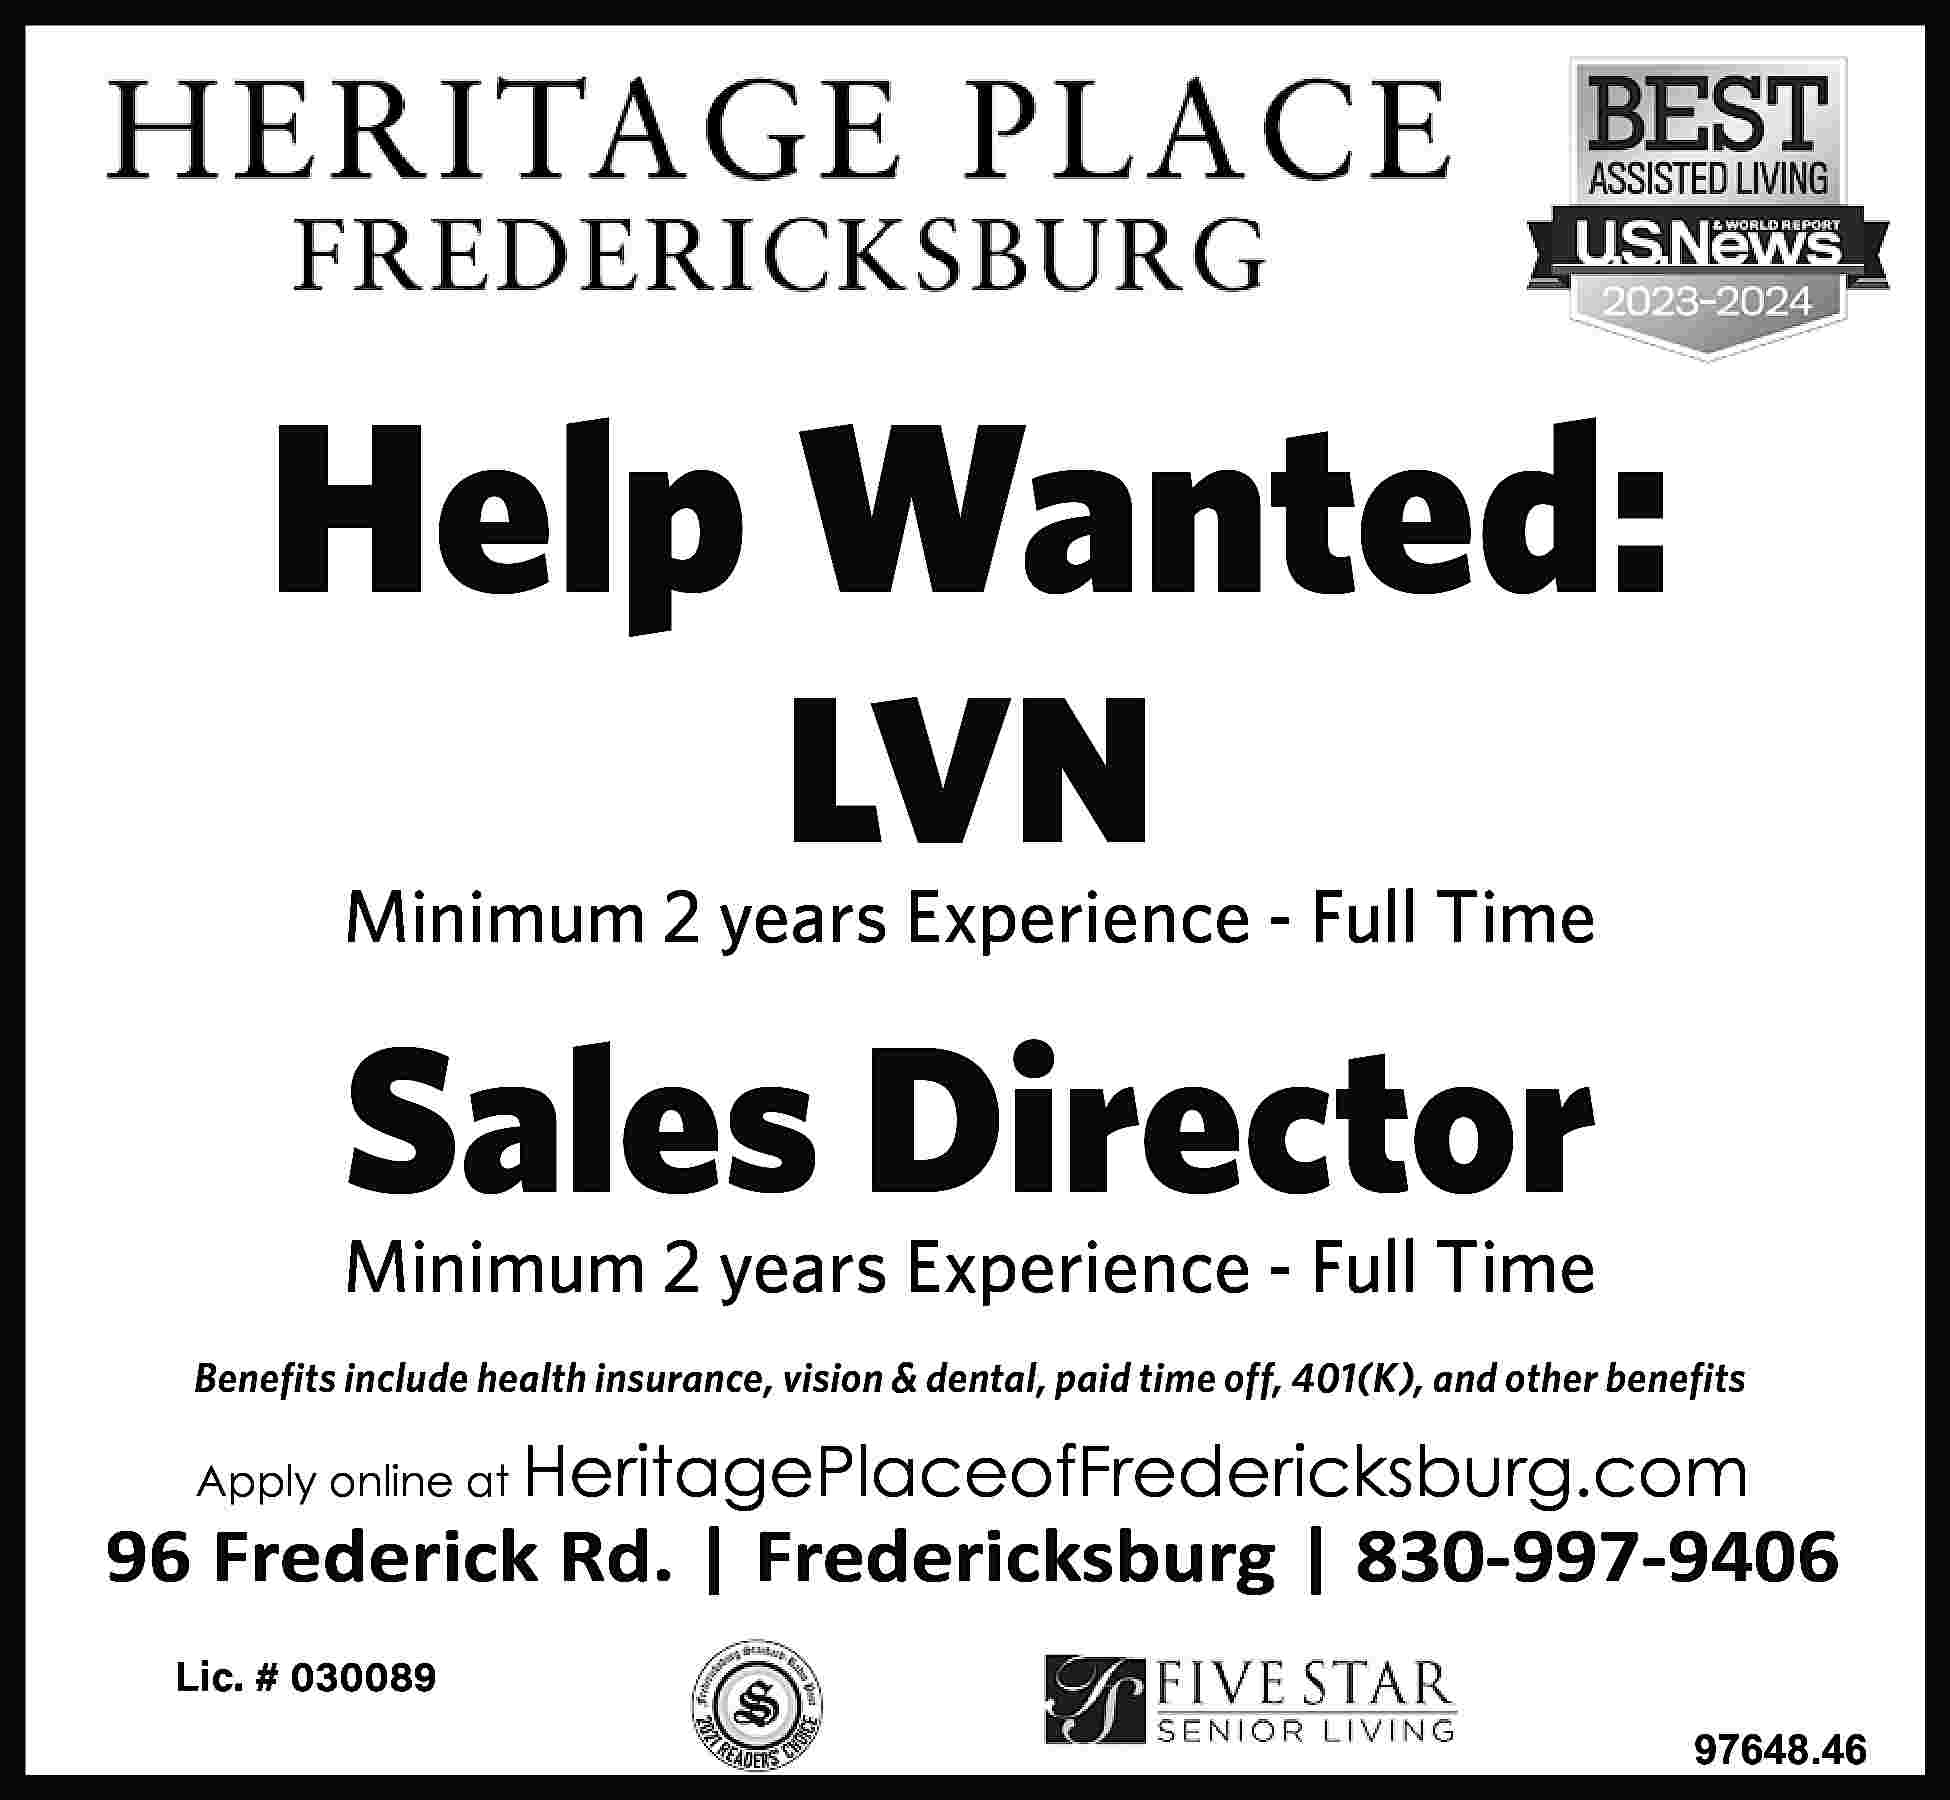 Help Wanted: LVN Minimum 2  Help Wanted: LVN Minimum 2 years Experience - Full Time Sales Director Minimum 2 years Experience - Full Time Benefits include health insurance, vision & dental, paid time off, 401(K), and other benefits Aplyonieat HeritagPlcofFdksbu.com Lic. # 030089 97648.46